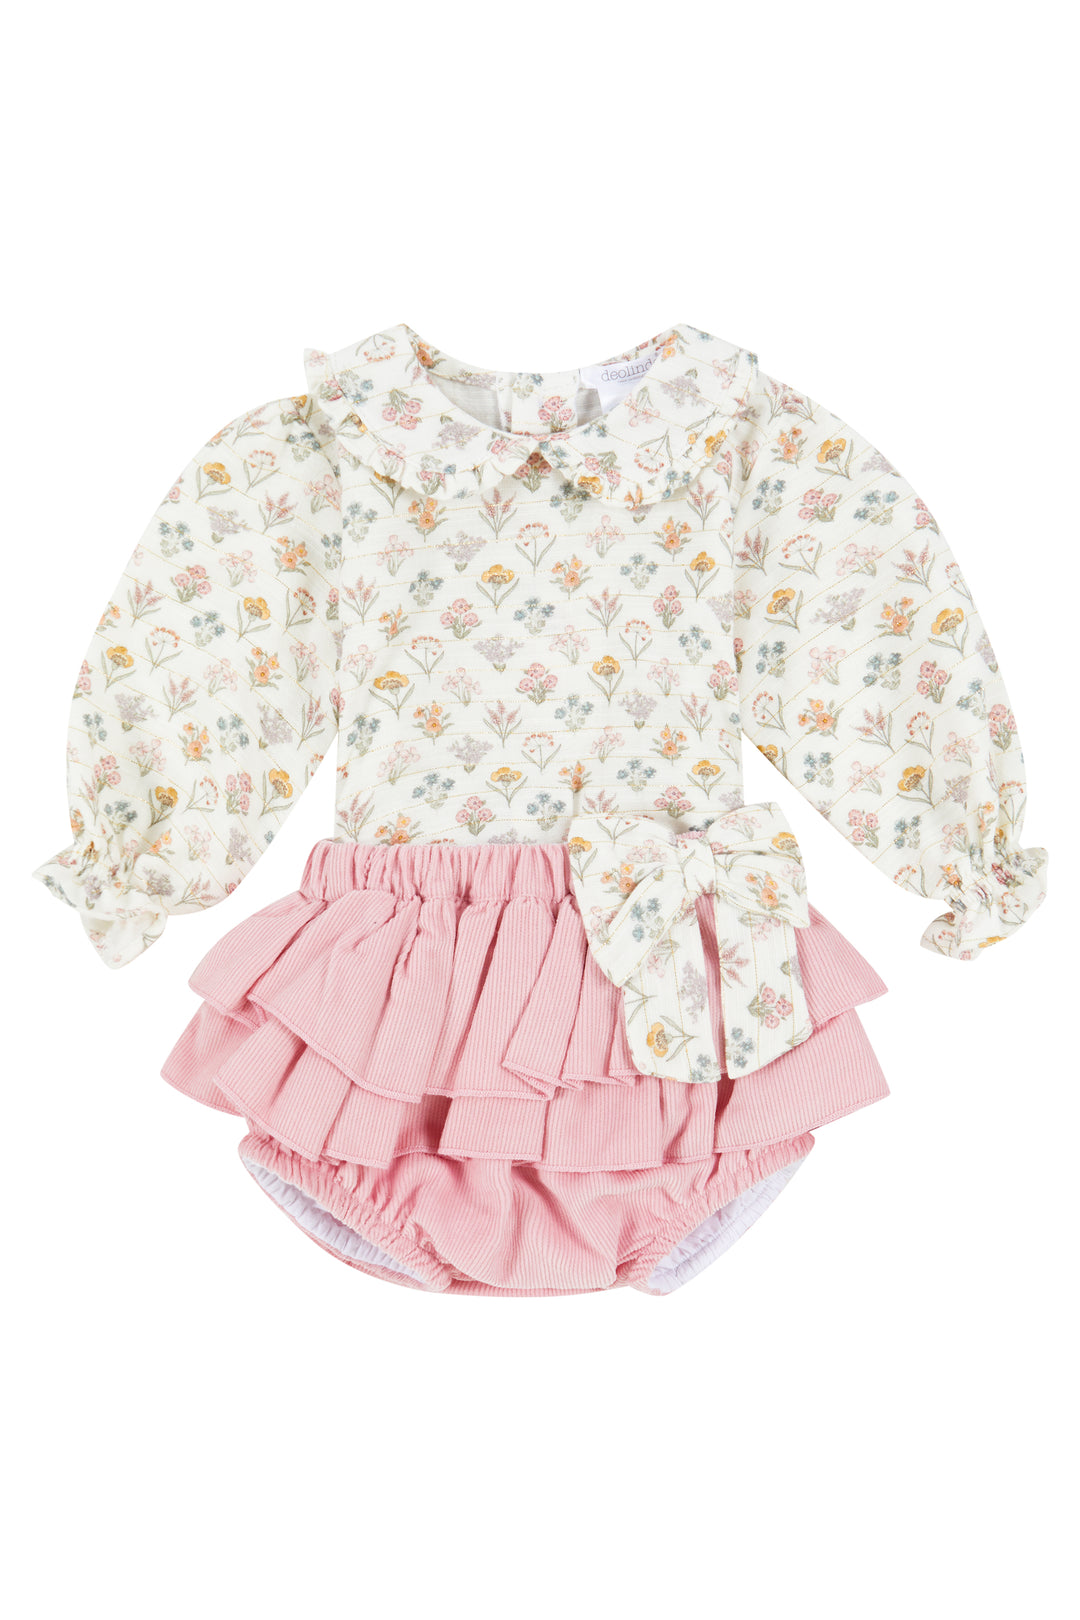 Deolinda "Lana" Dusky Pink Floral Blouse & Cord Bloomers | Millie and John